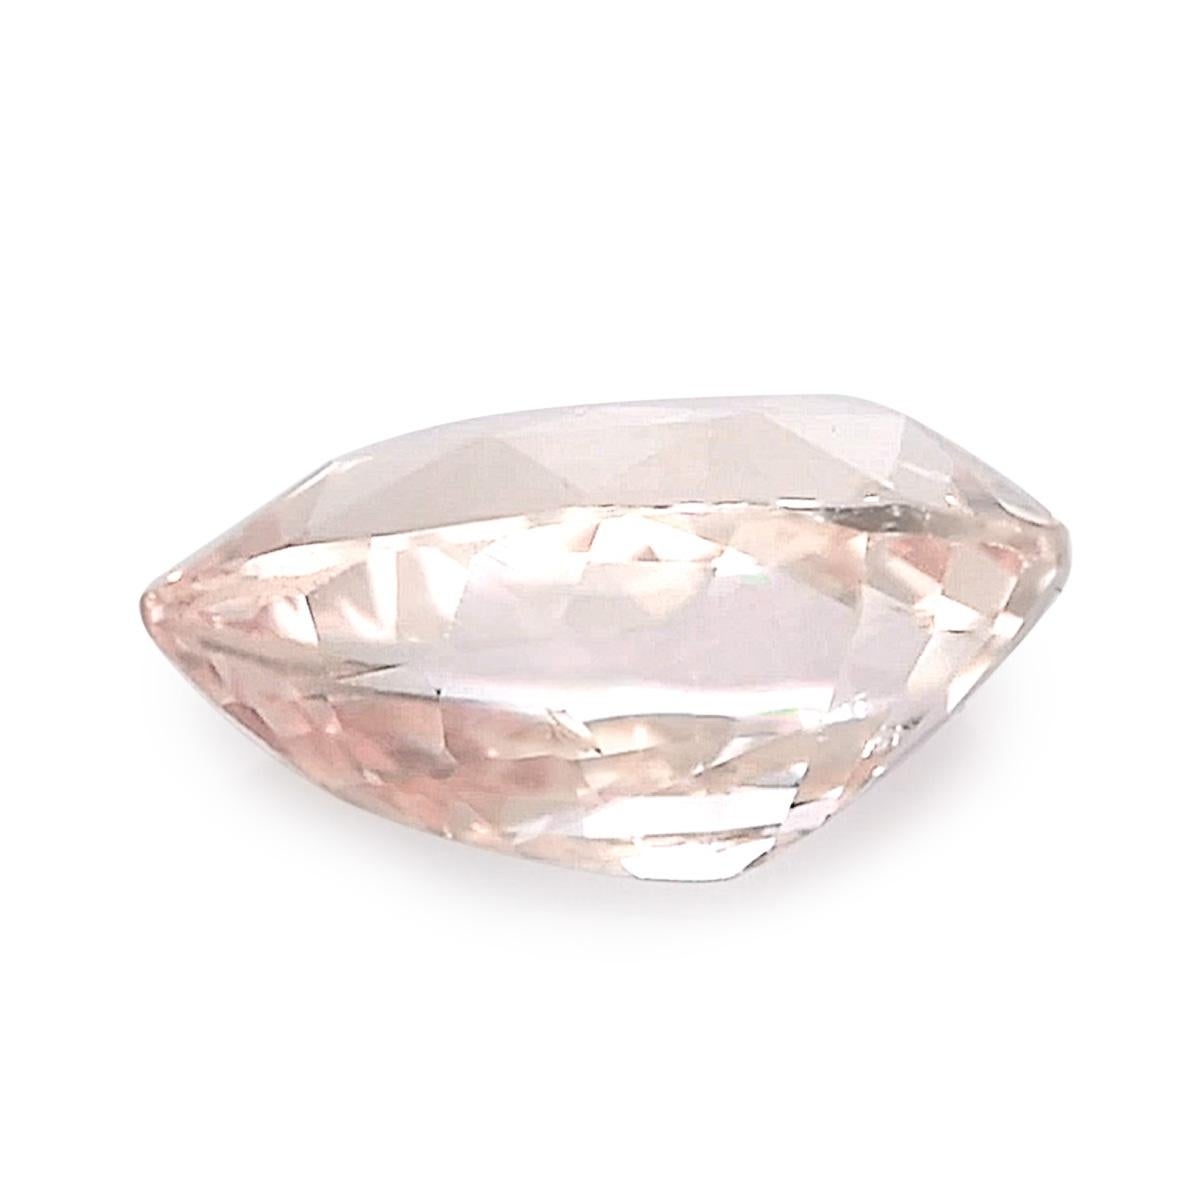 Mixed Cut 1.51 Carats Peach Sapphire  For Sale